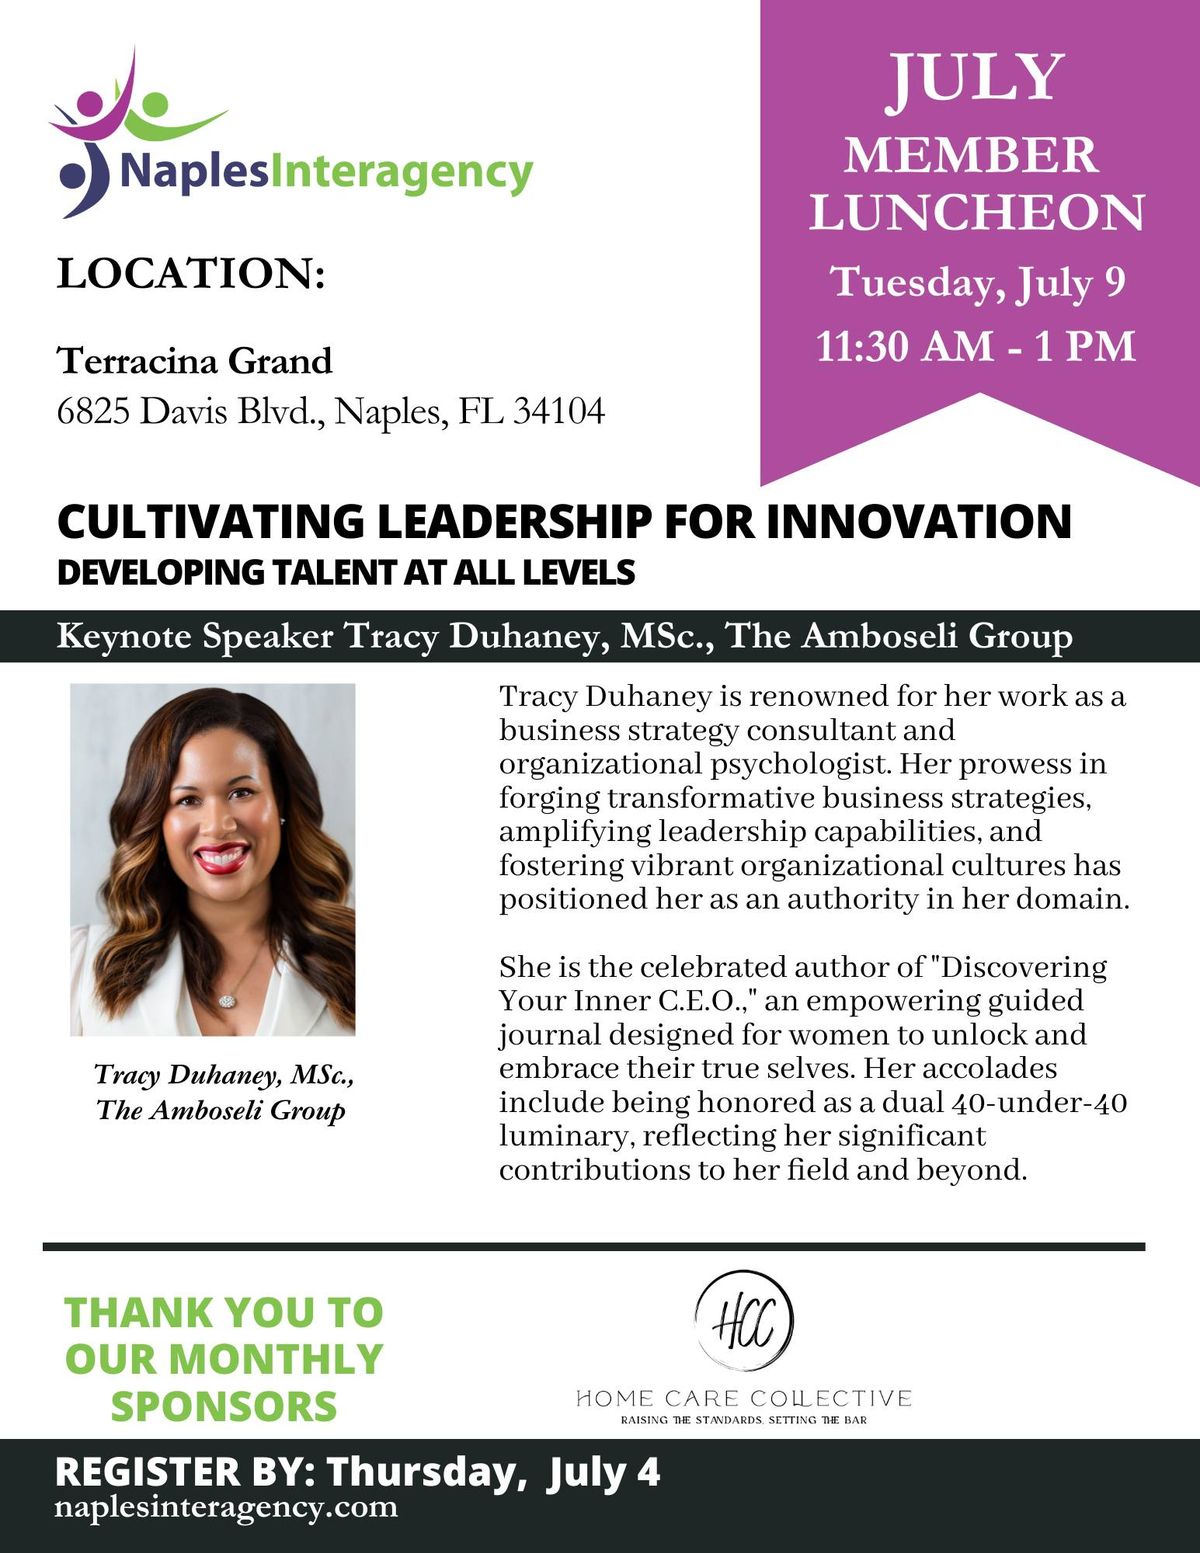 JULY Monthly Meeting: Cultivating Leadership For Innovation - Developing Talent At ALL Levels